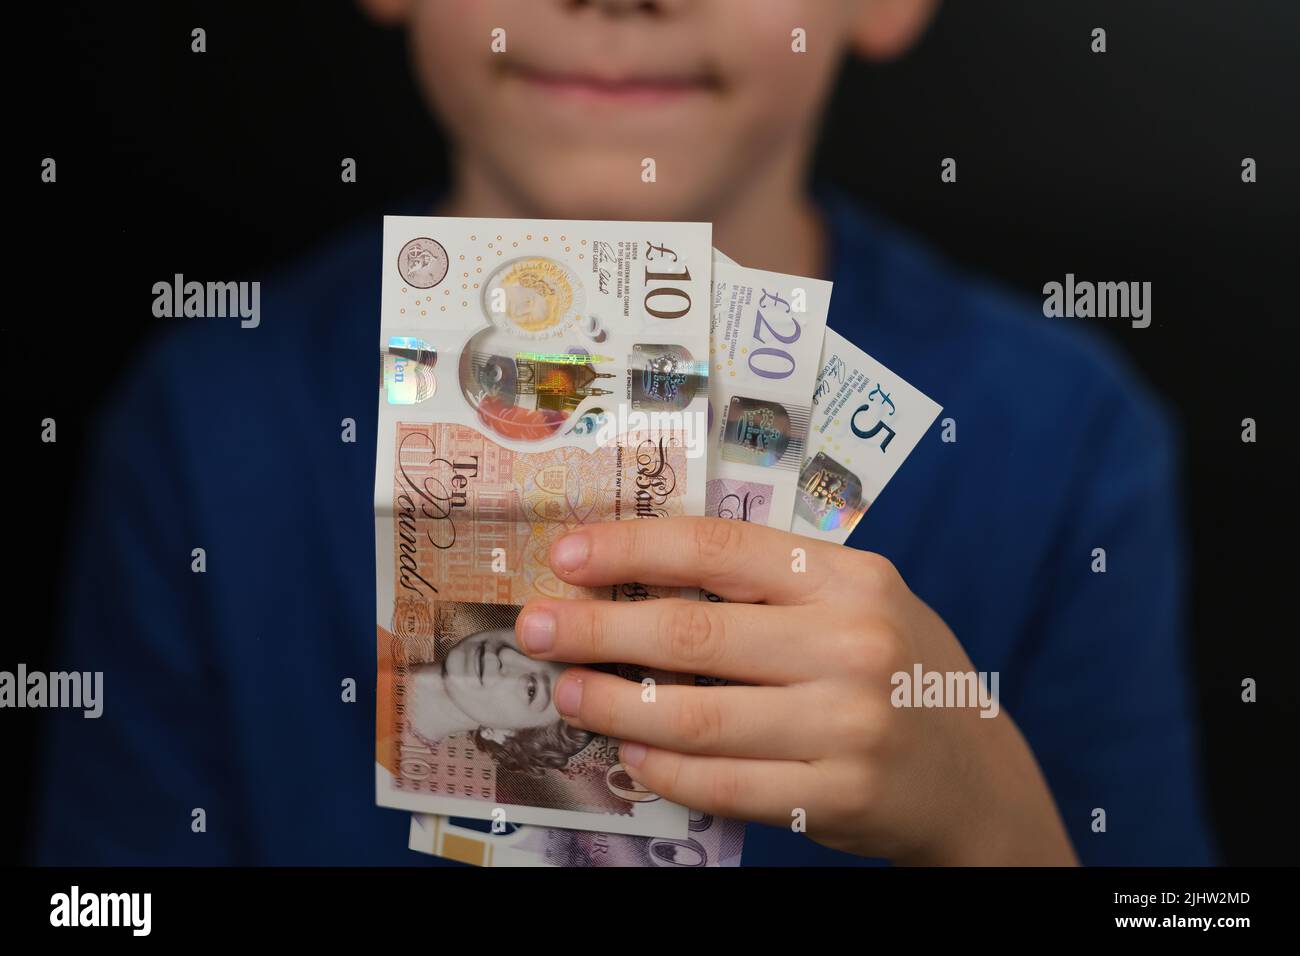 Pound Sterling banknotes of 10, 20, 5 pounds seen in hands of a happy child. Concept for personal finance and children. Stock Photo